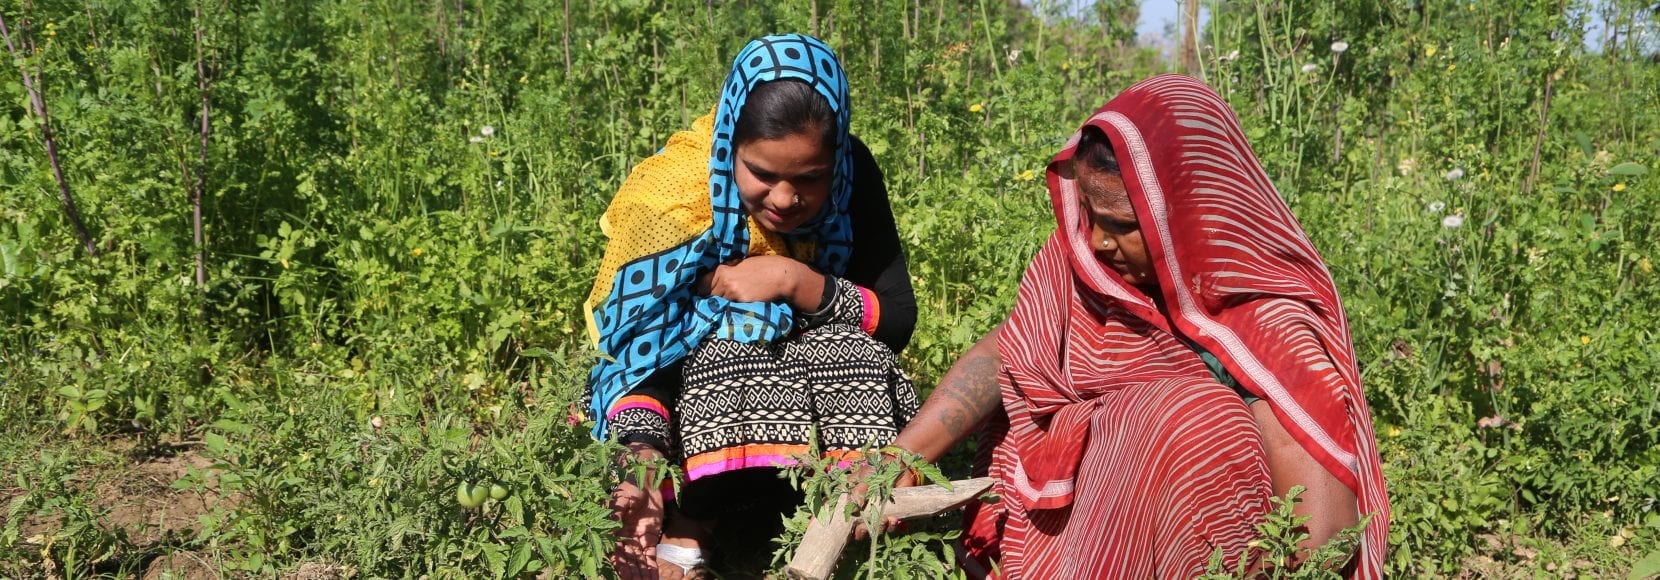 Two women inspecting their crops in India